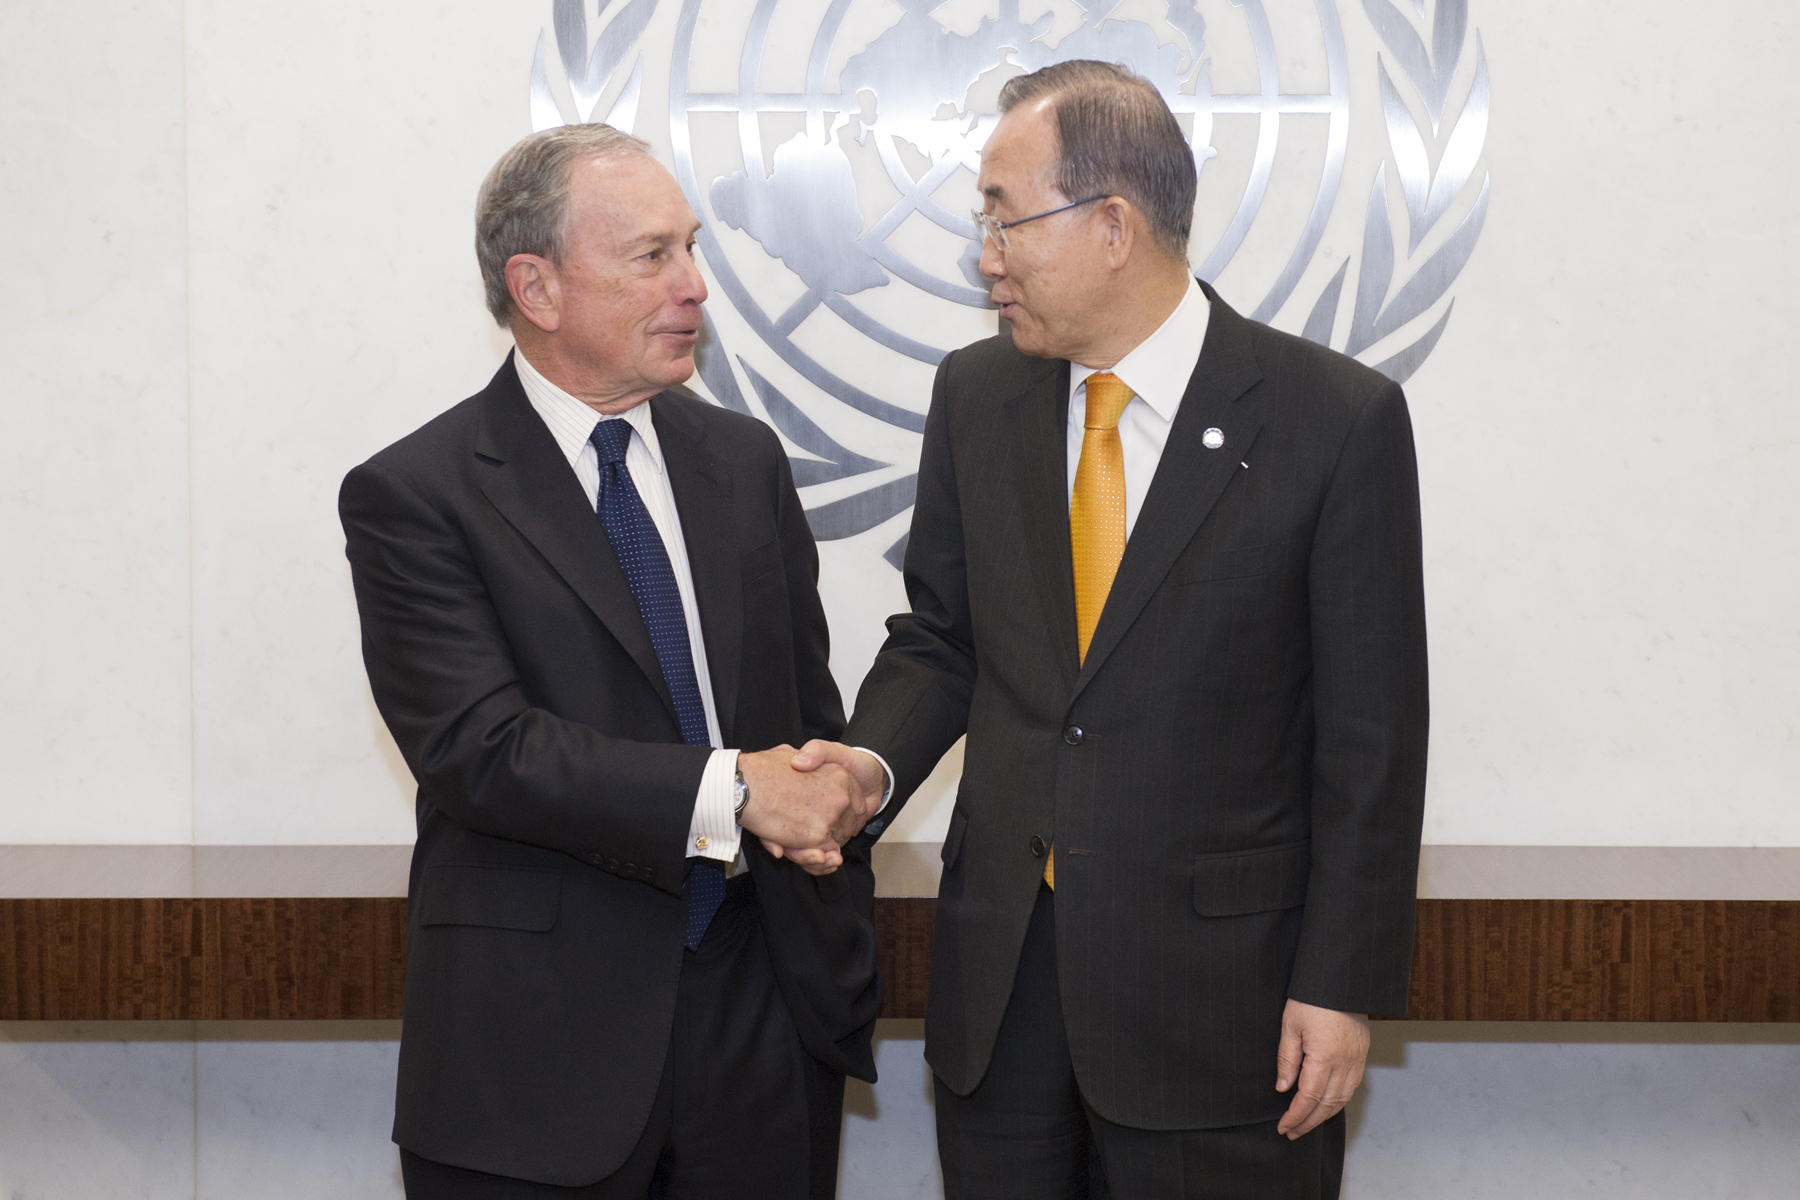 Secretary-General Ban Ki-moon (right) meets with Mr. Michael Bloomberg, Special Envoy of the Secretary-General for Cities and Climate Change.